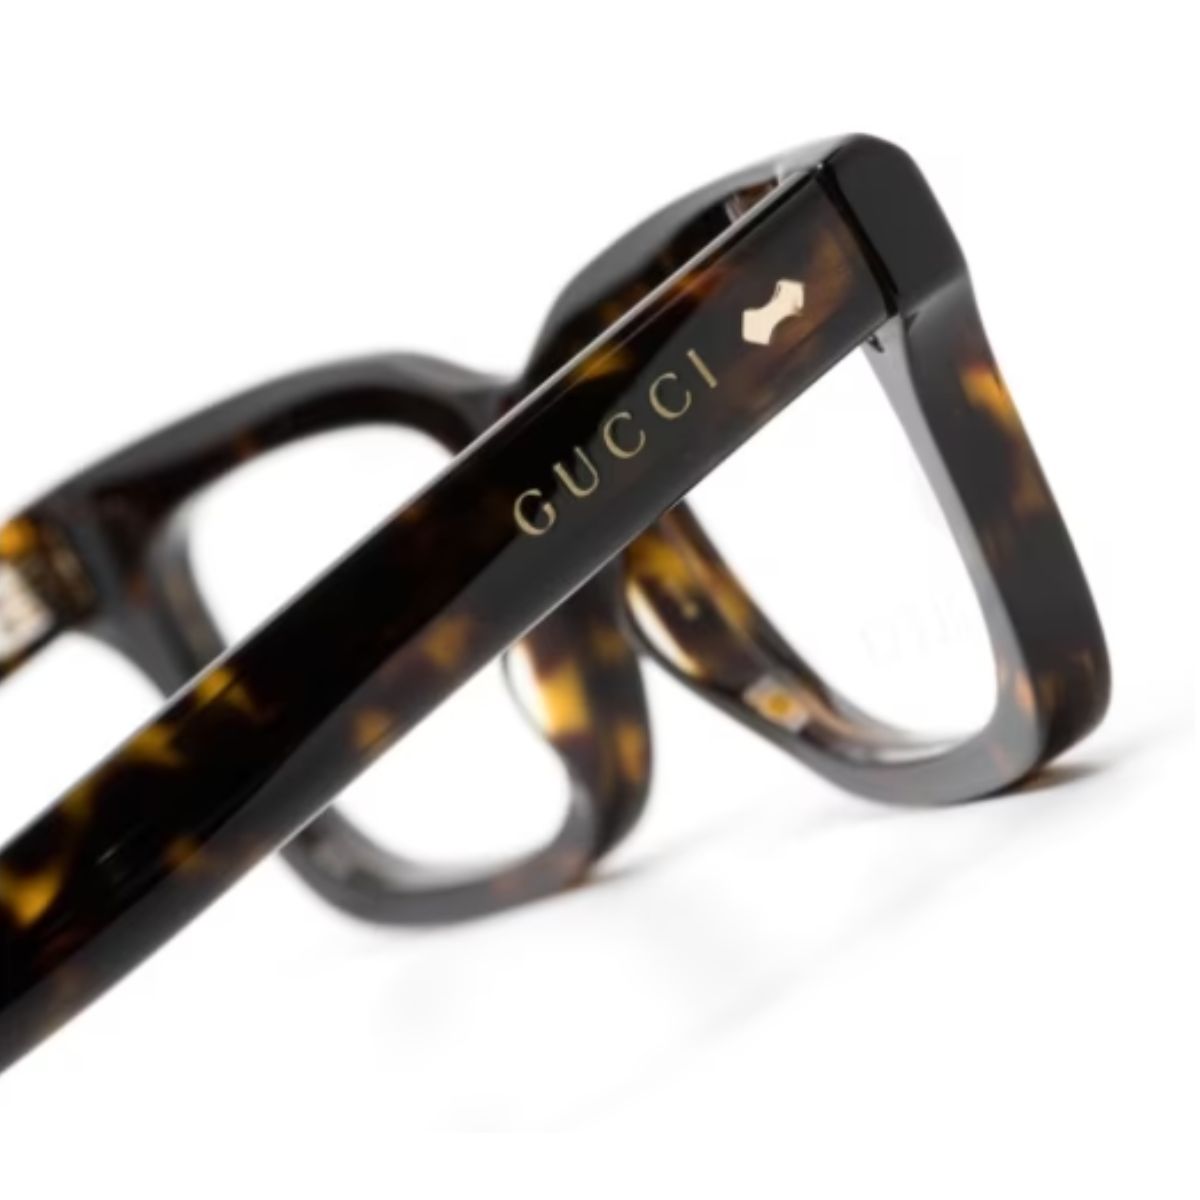 "Gucci Spectacles: Browse the Trendiest 1522O 006 Frames Online for Men and Women"